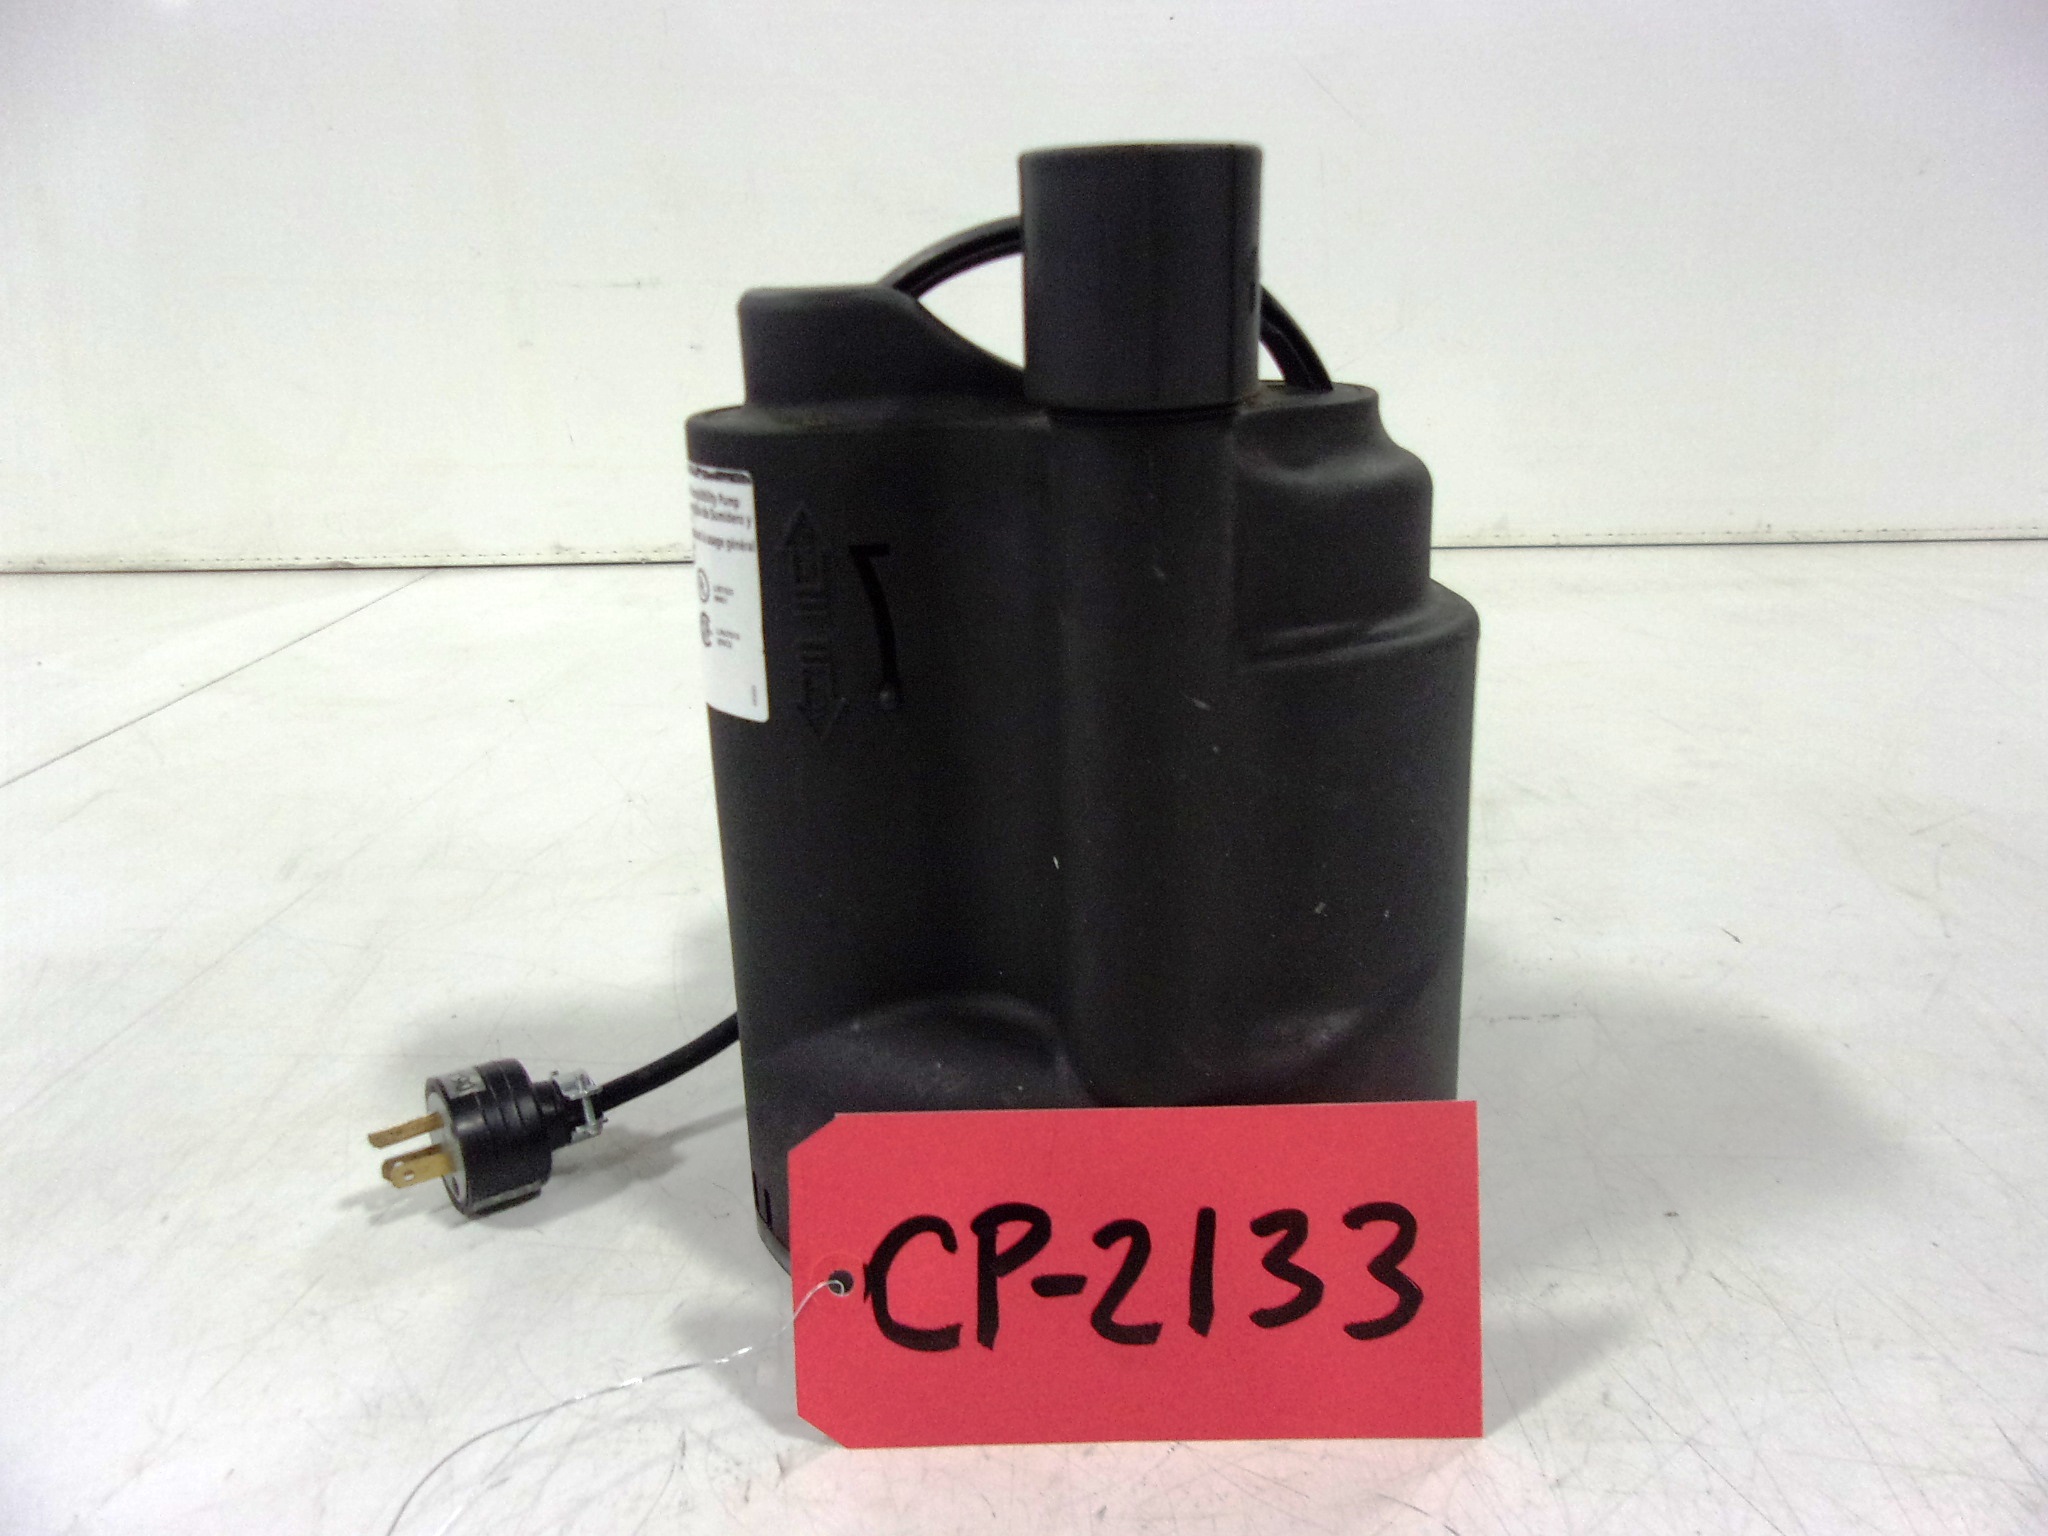 Used Centrifugal Pump - Dayton 1/4 HP Radial Bottom 1.25" Outlet Sump Pump-Pumps - Centrifugal